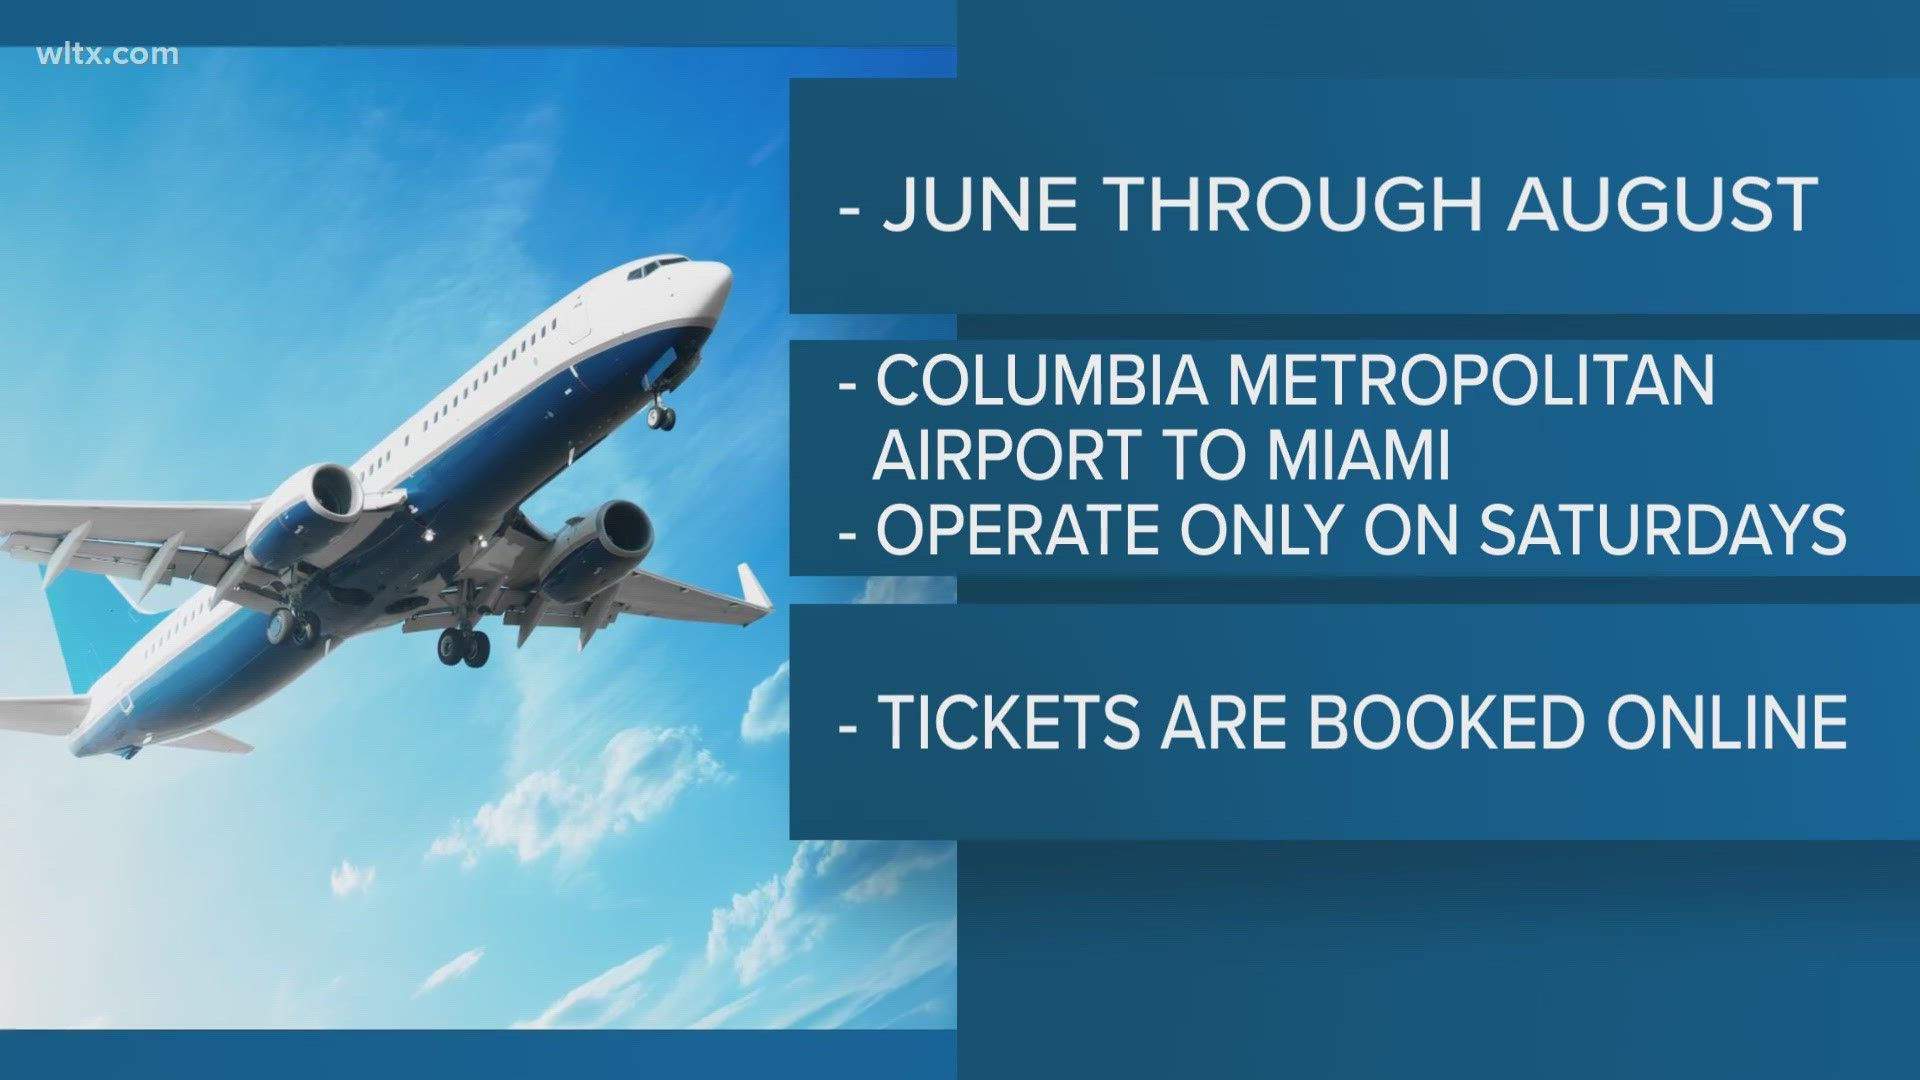 The Columbia Airport has announced their seasonal services this summer.